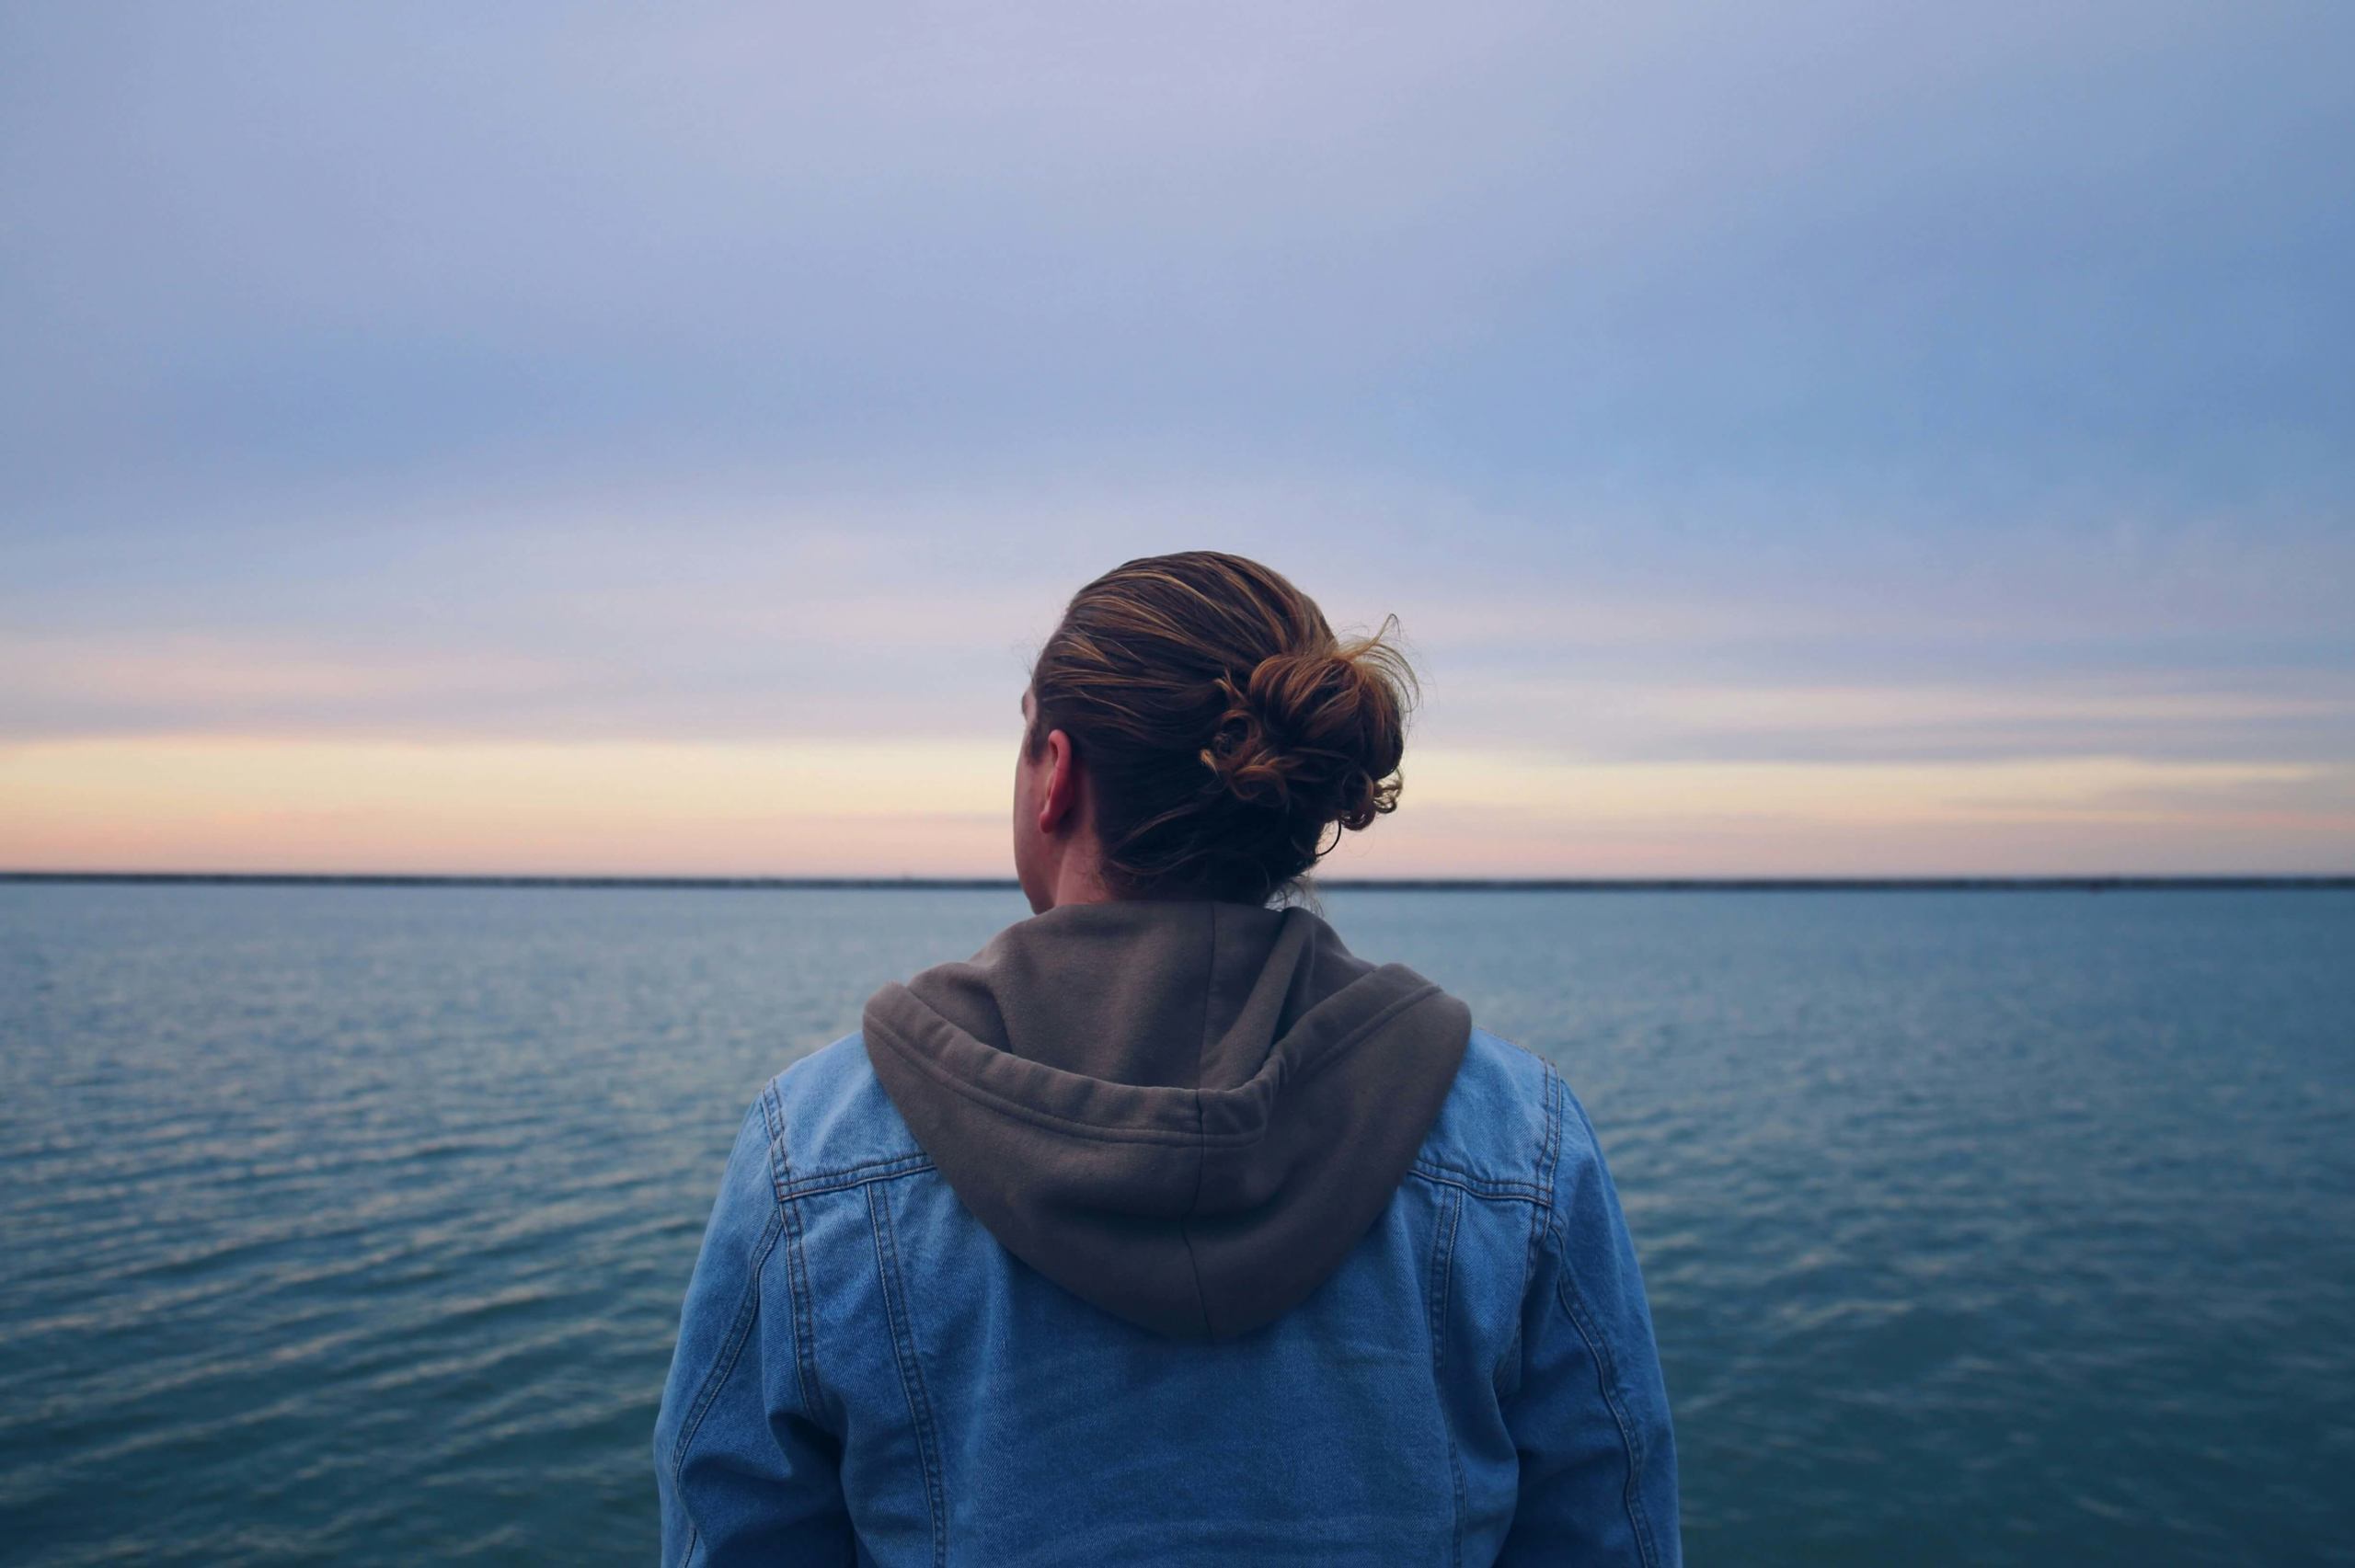 Image of a peaceful man looking out at a body of water while the sun rises. Overcome your past relational trauma with the help of trauma therapy in Austin, TX and boundaries.